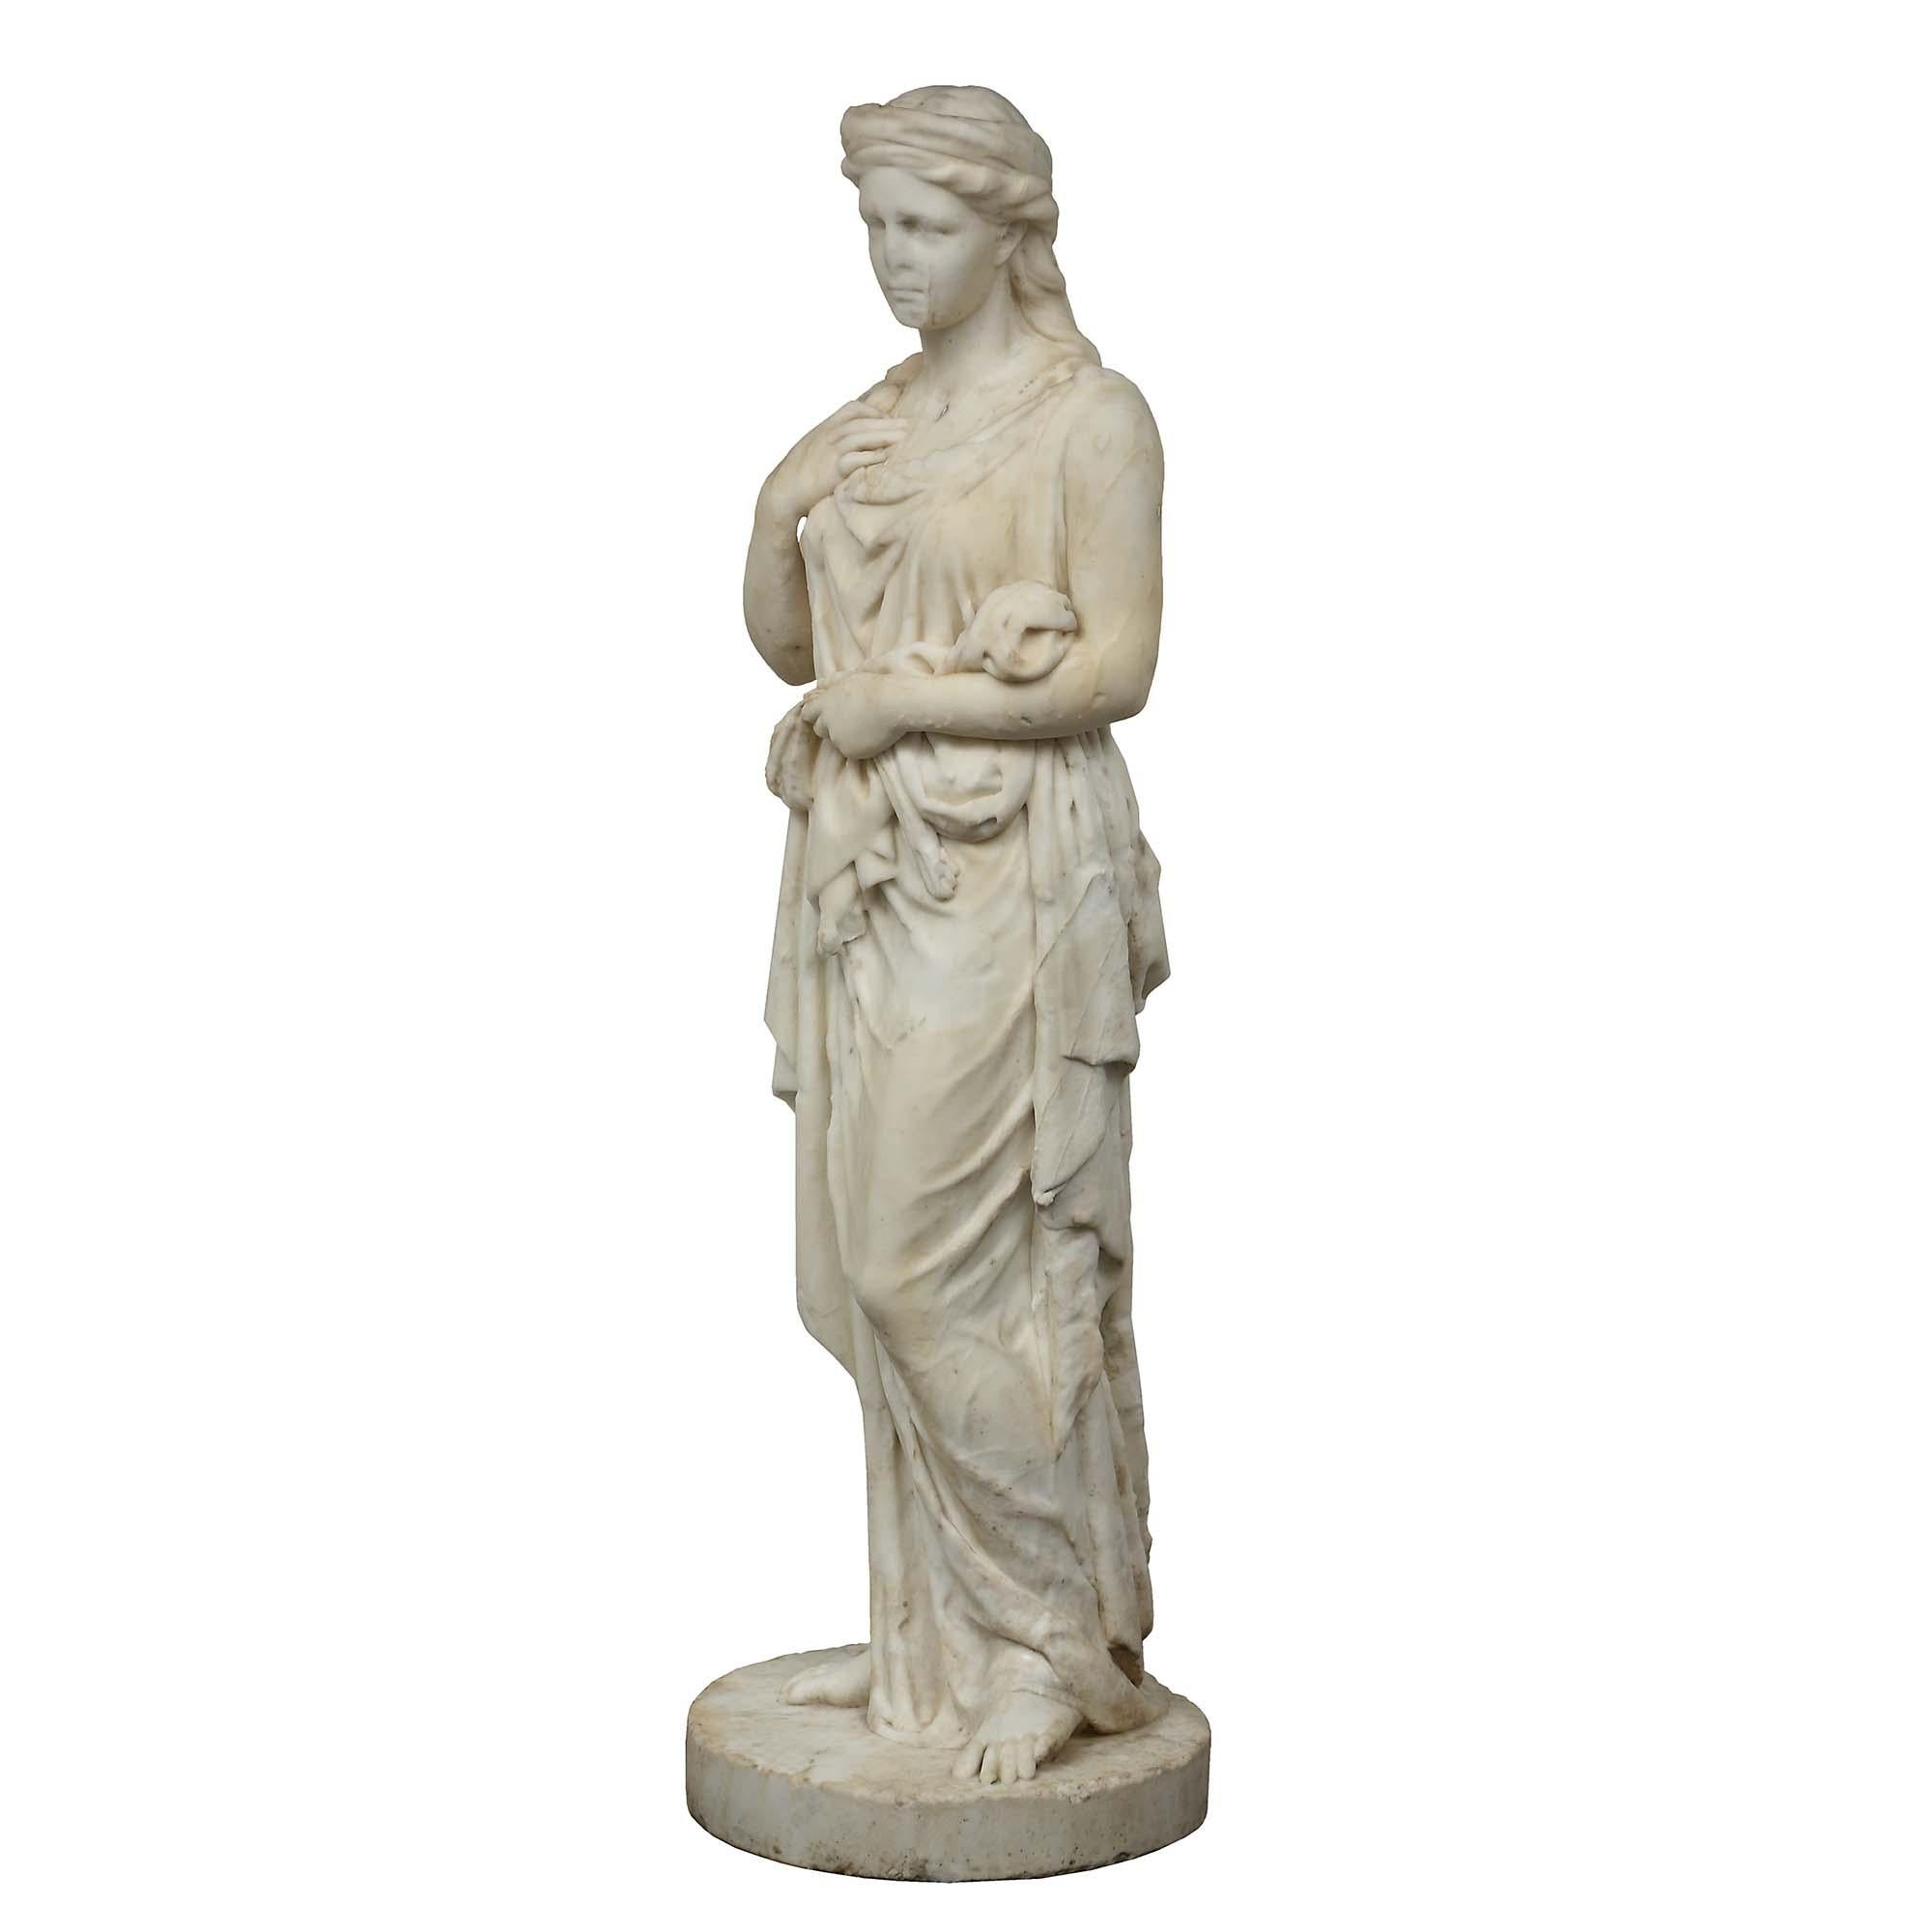 A lovely Italian early 19th century solid white Carrara marble statue of a young maiden. The seasoned figure is raised on a solid circular base. The bare footed maiden is draped in classical dress, one hand gathering up her skirt and her other hand